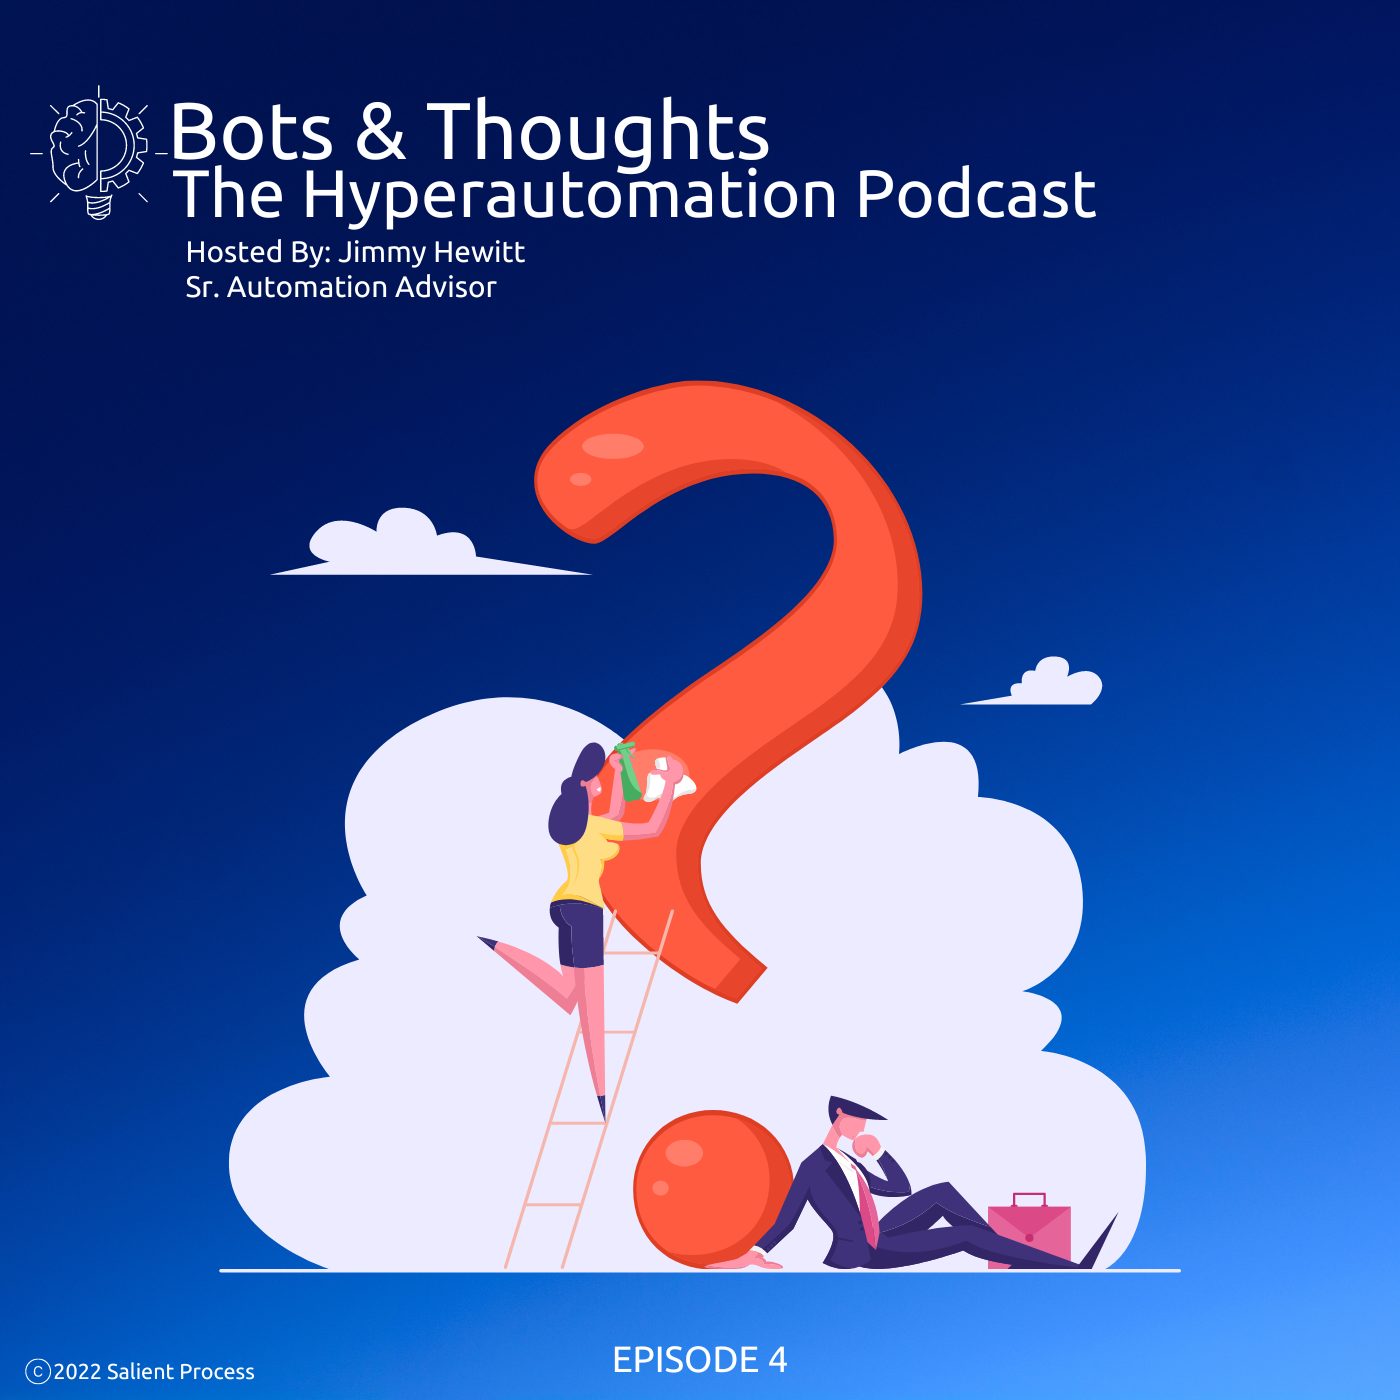 Bots & Thoughts: The Hyperautomation Podcast, Hosted by Jimmy Hewitt (Sr. Automation Advisor) - Episode 4 - Cover Art